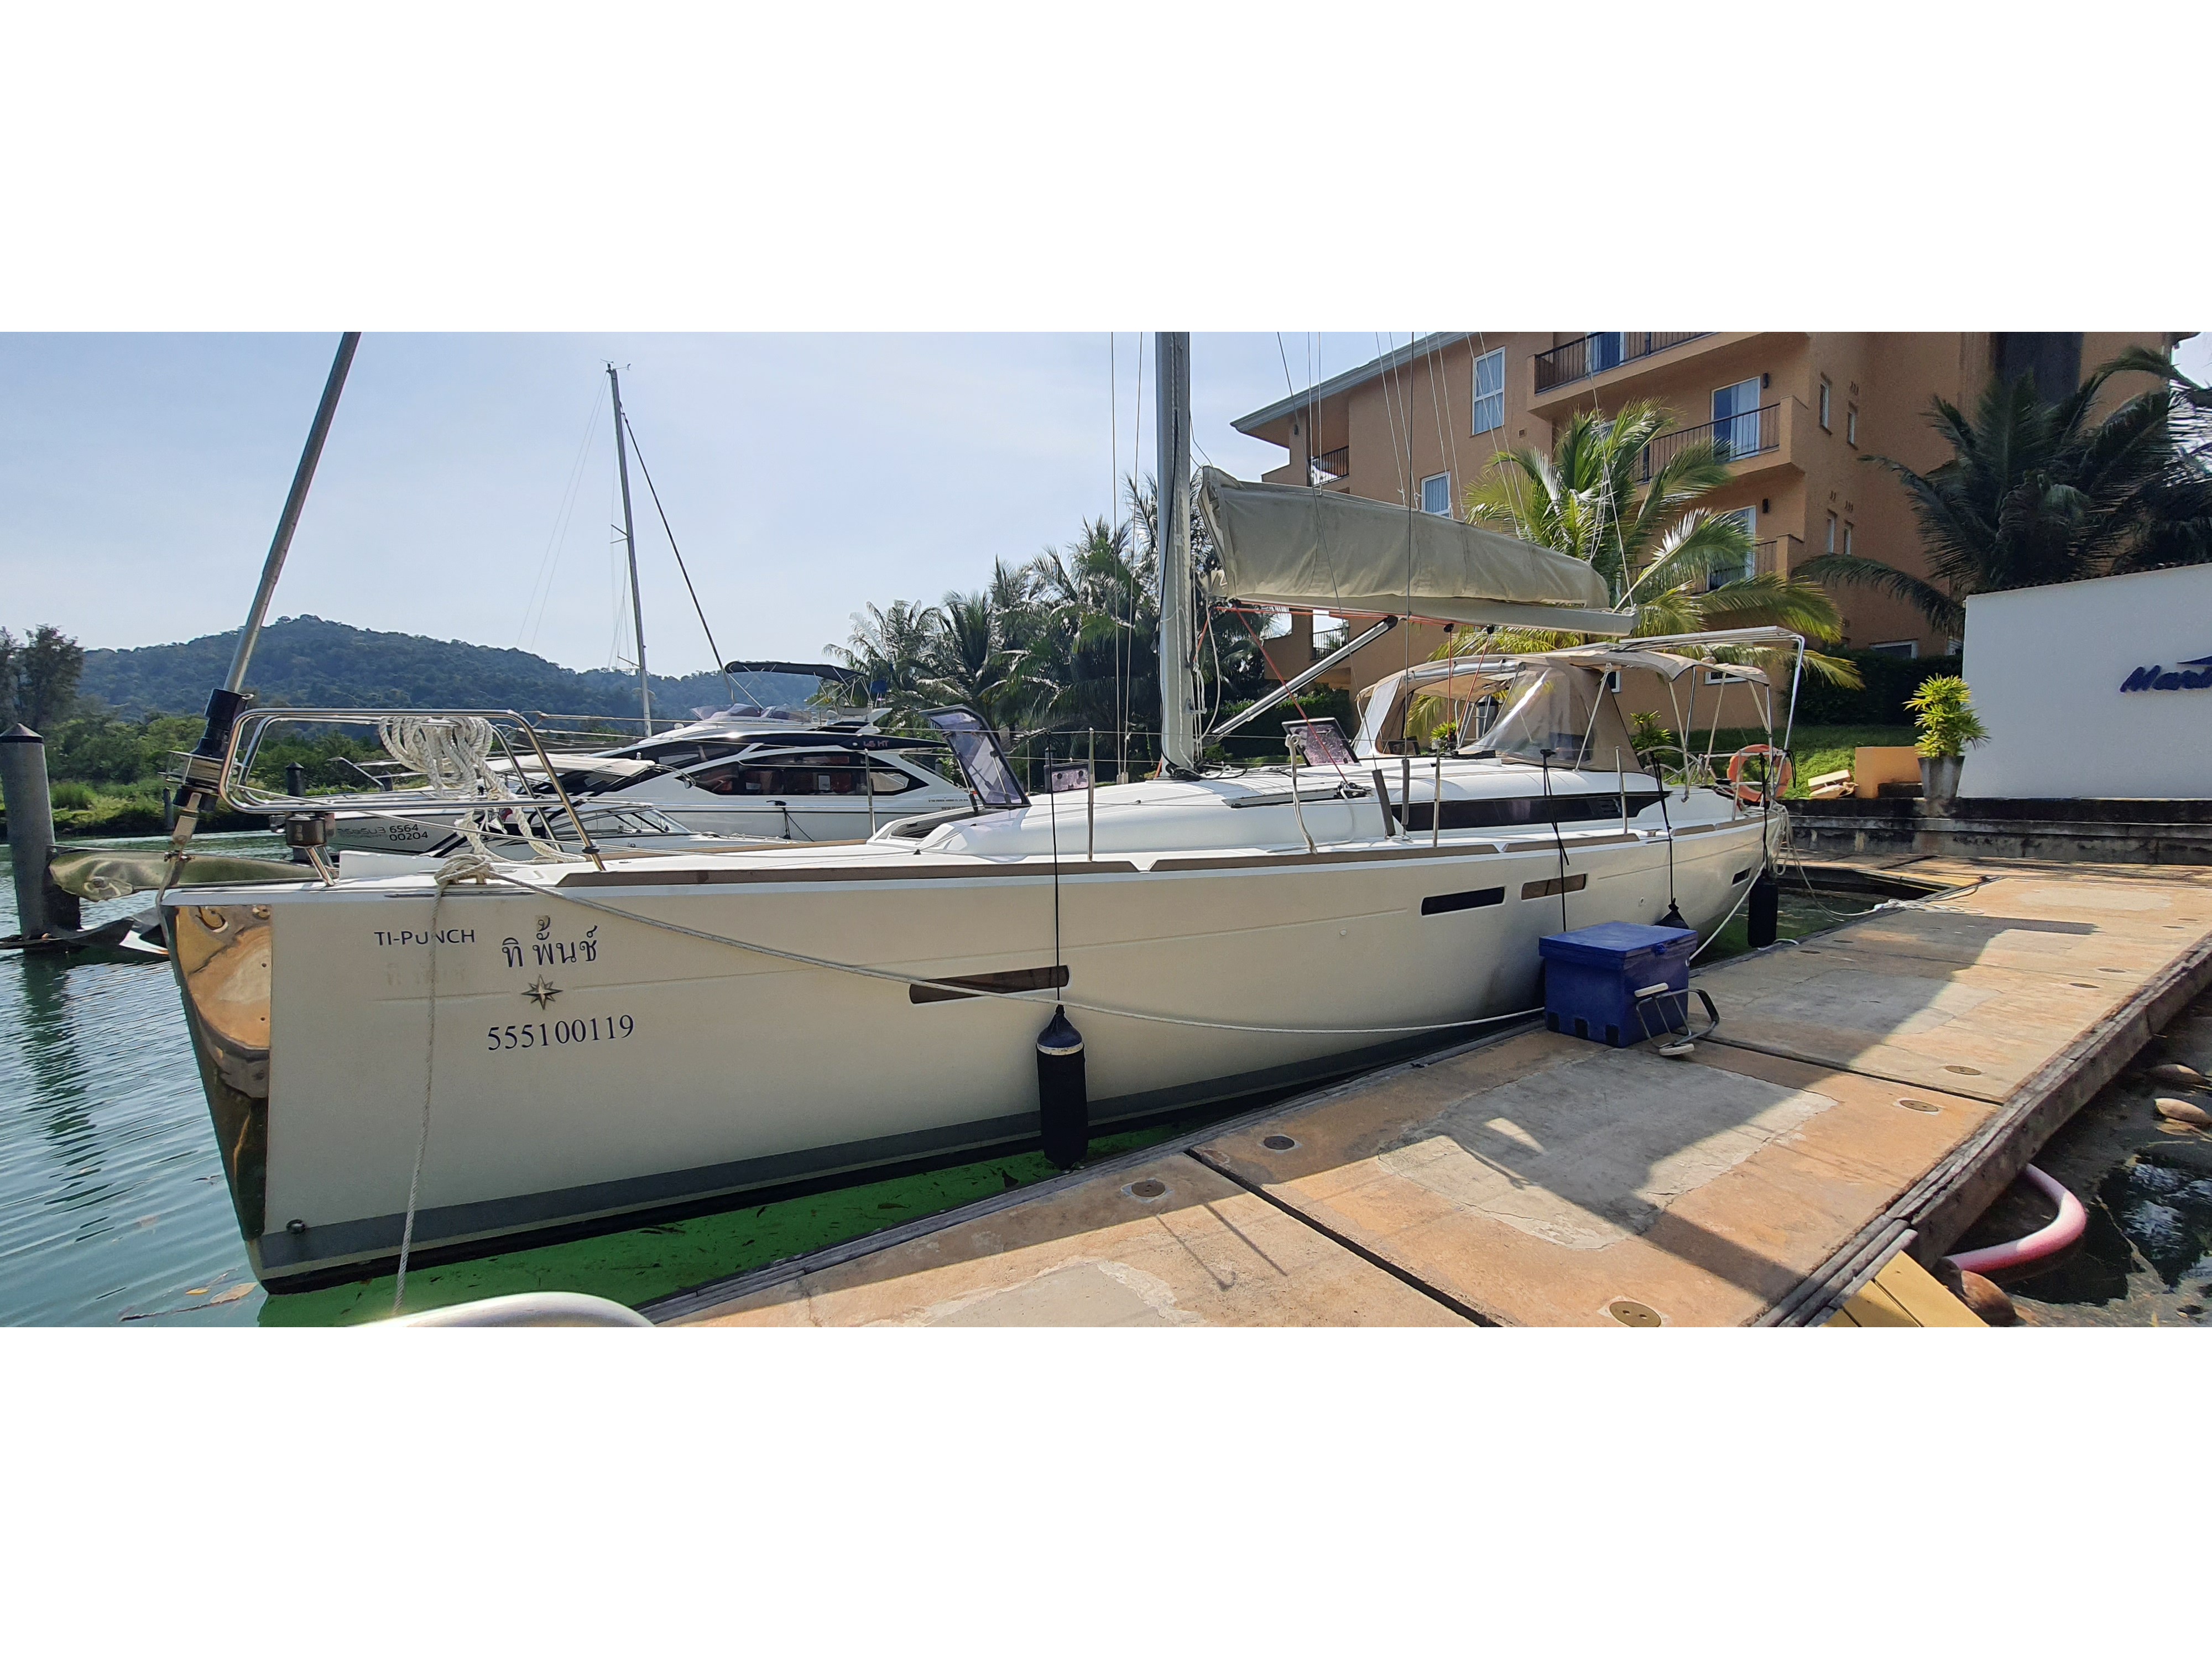 Sun Odyssey 409 - Sailboat Charter Thailand & Boat hire in Thailand Koh Chang Ao Salak Phet 3